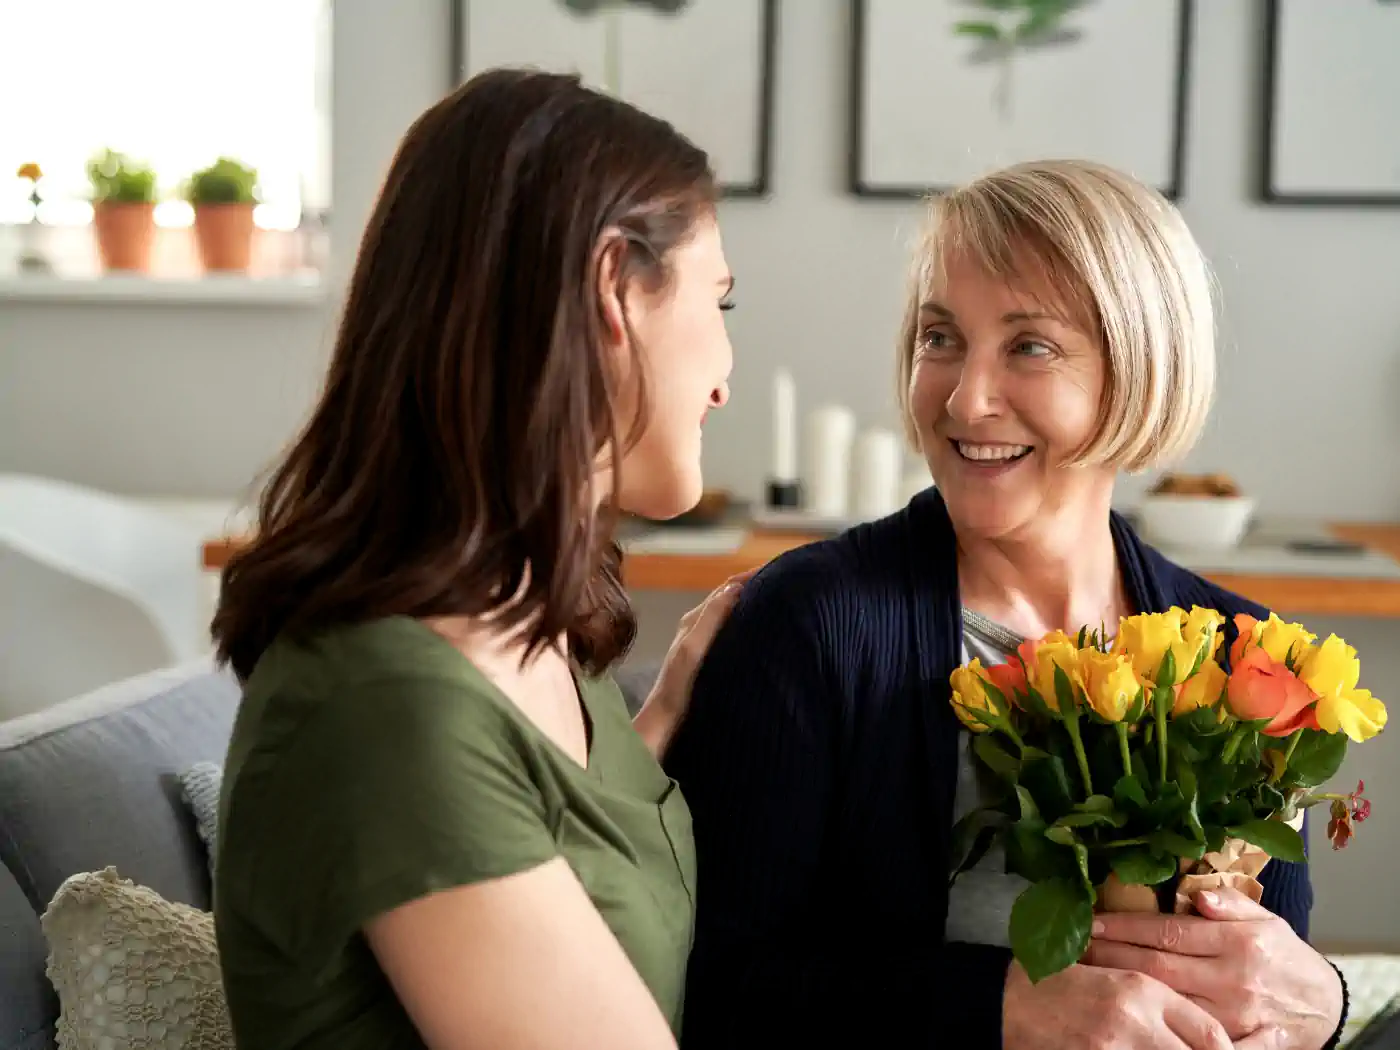 Older woman with a joyful expression receiving a vibrant bouquet of yellow and orange roses from a younger woman in a cozy home setting, sharing a moment of gratitude. Fabulous Flowers and Gifts - Thank You Flowers. Delivered with Heart.